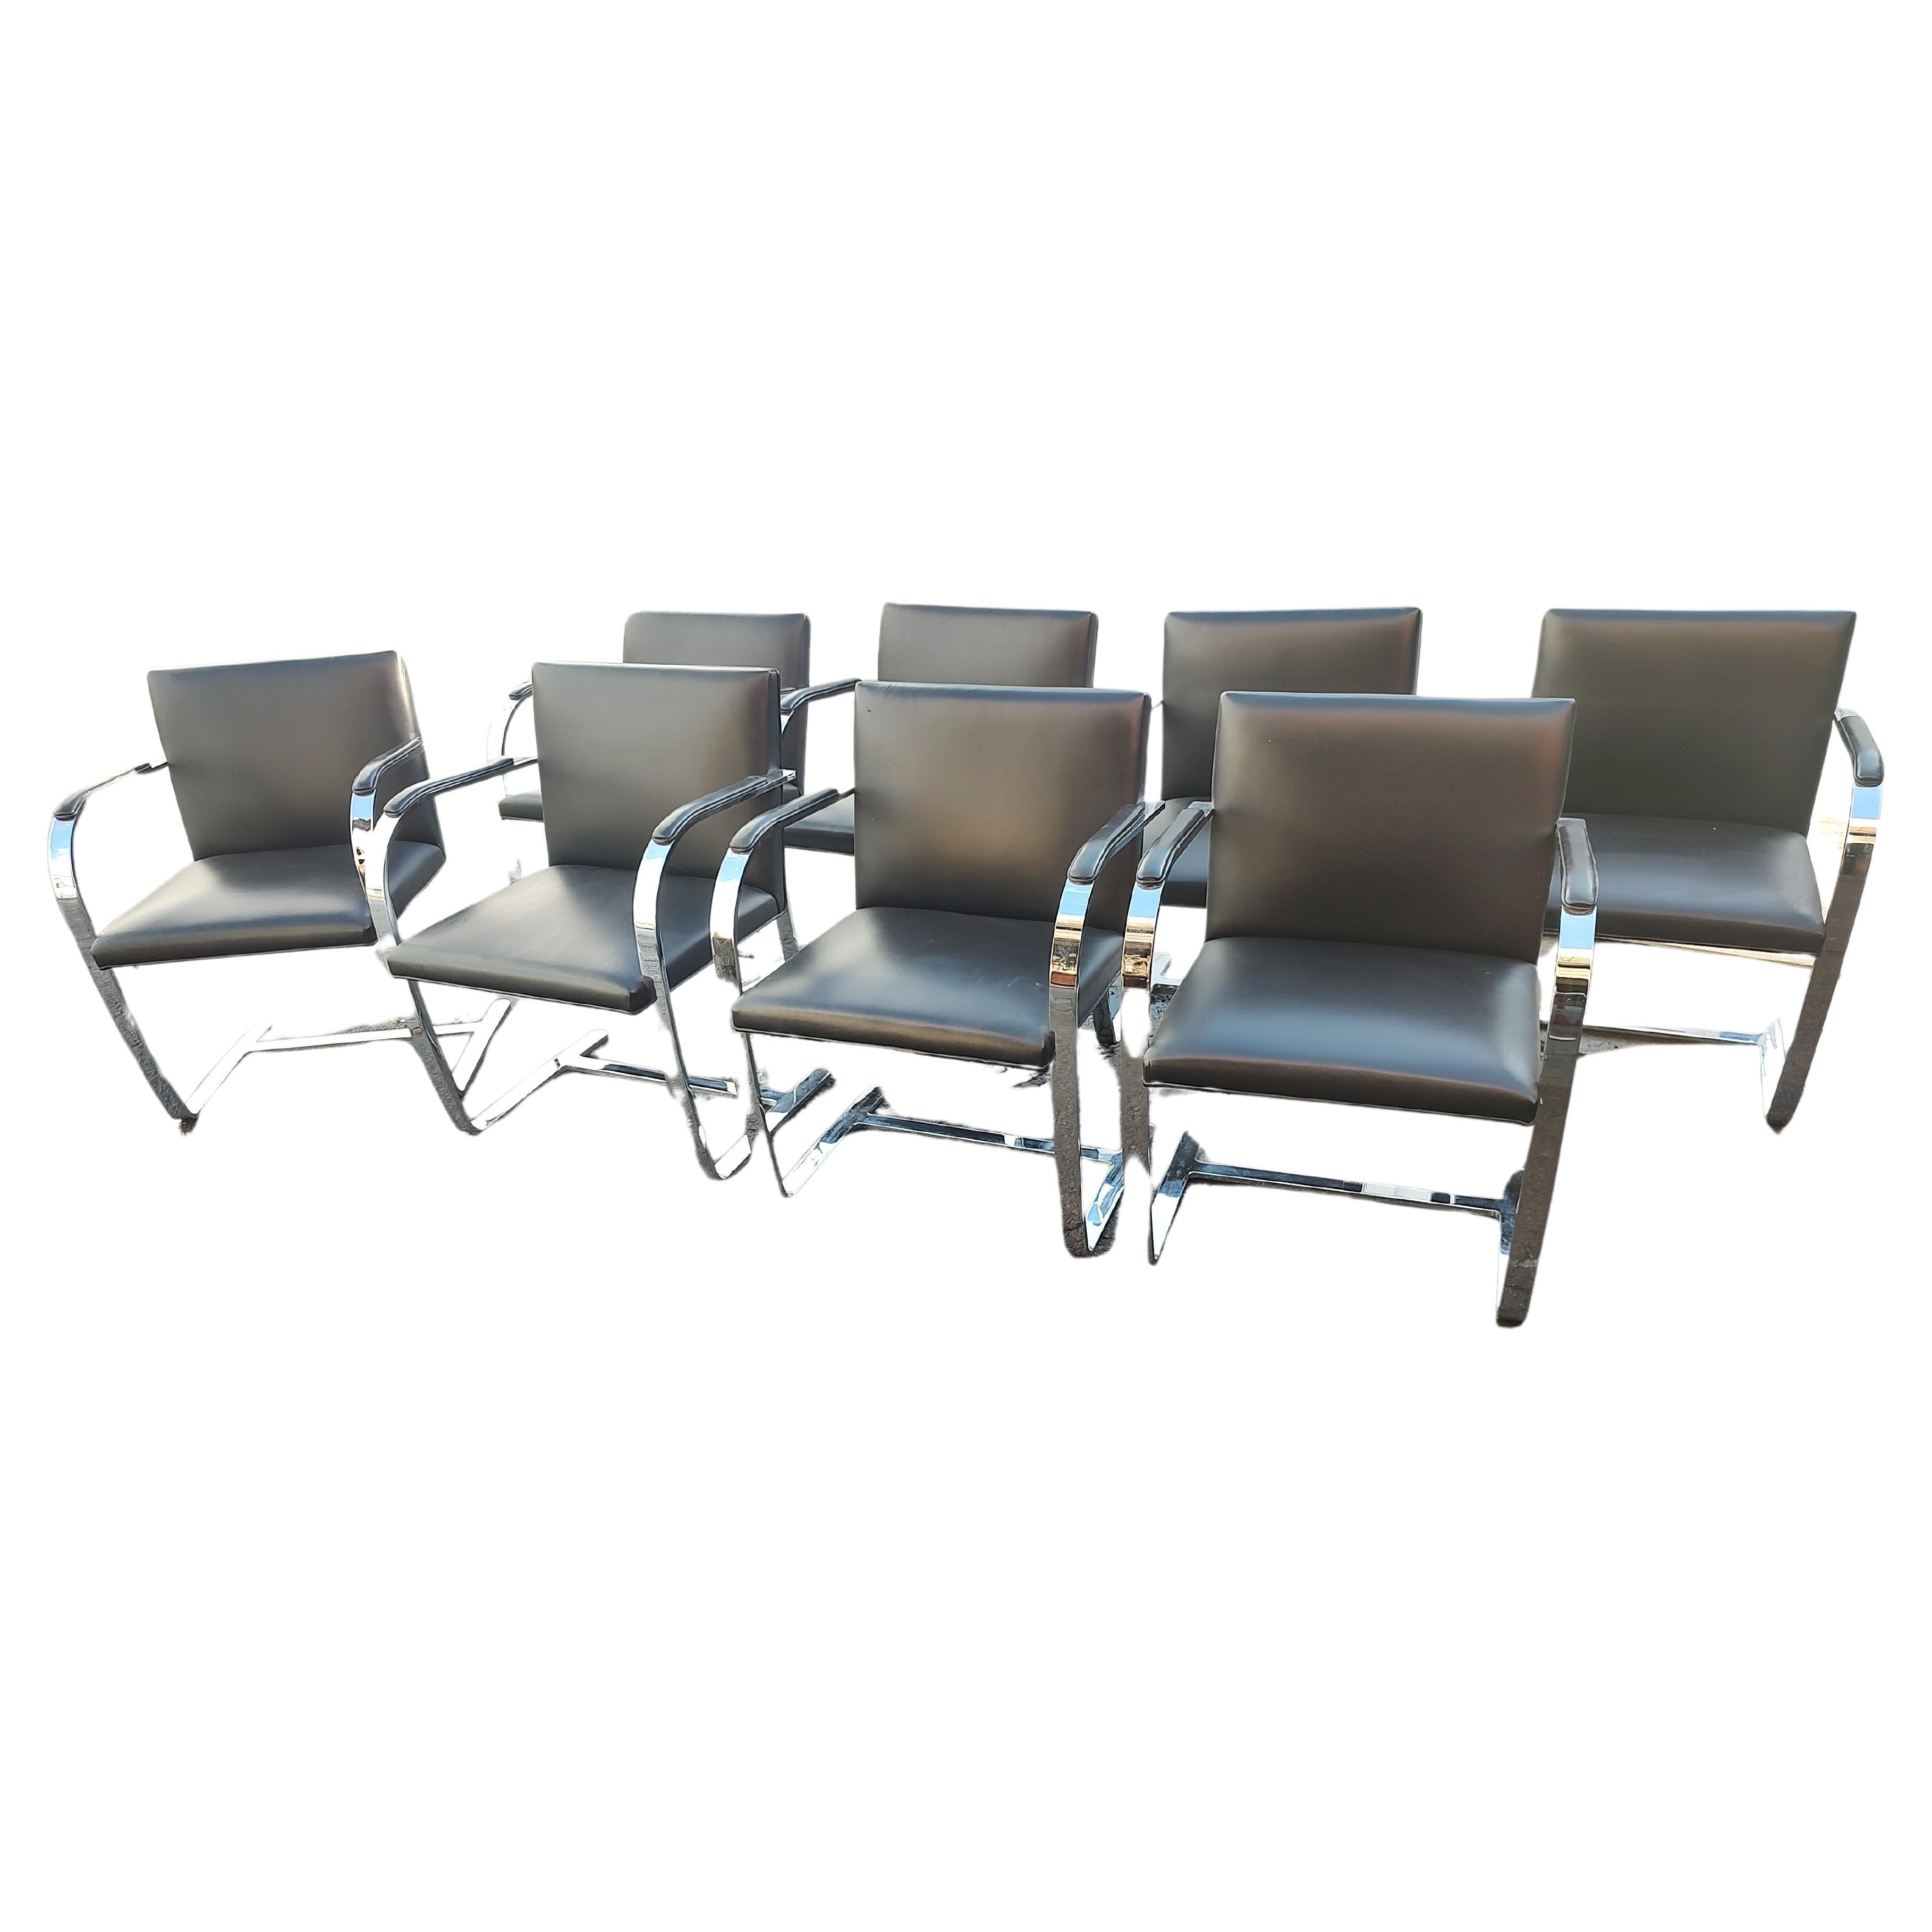 American Set of 8 Knoll Black Leather Flat Bar Brno Chairs by Ludwig Mies van der Rohe  For Sale